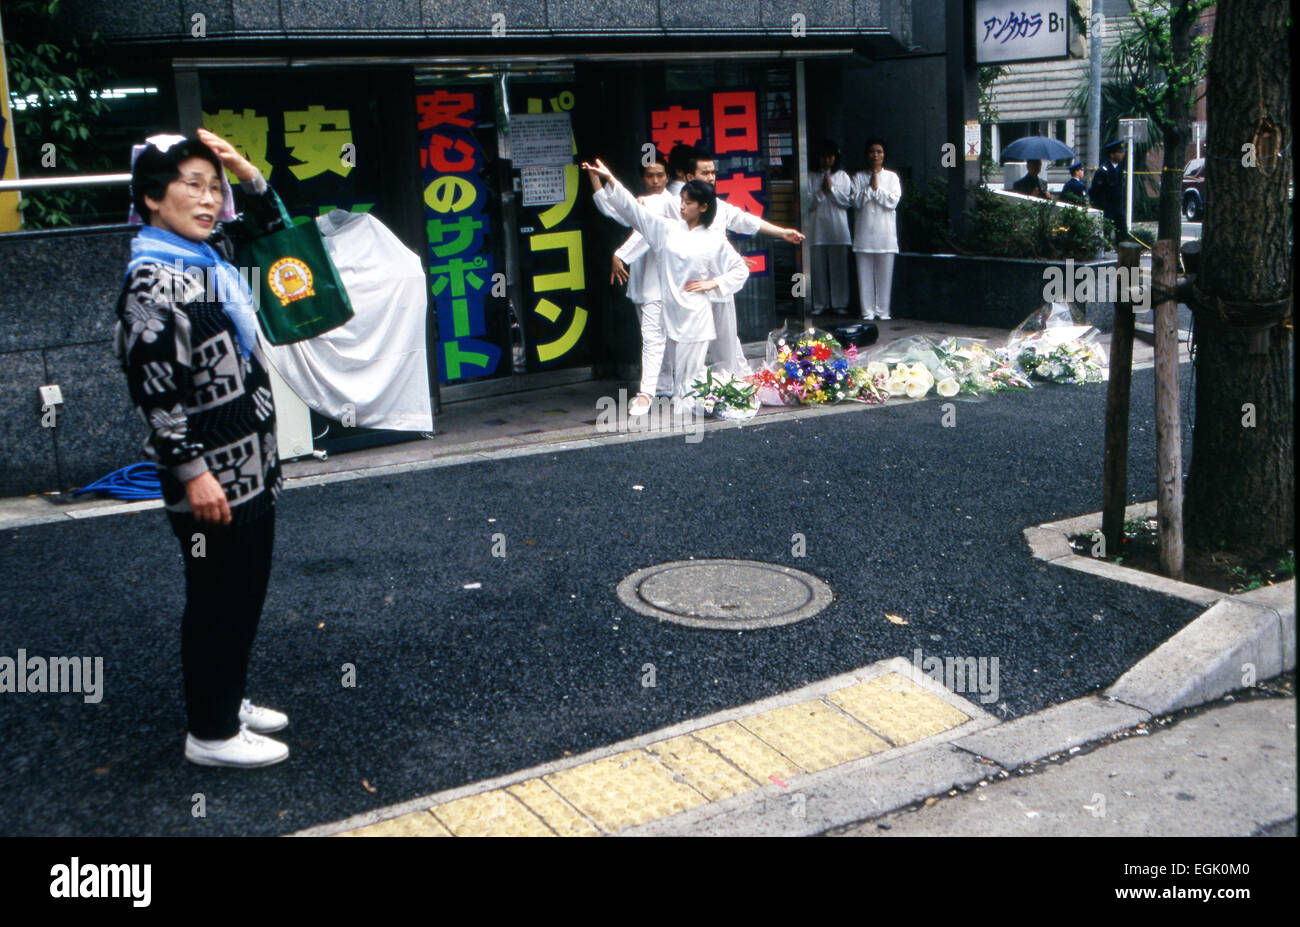 April, 1995, Tokyo, Japan - Members of Aum perform commemorative dance, mourning over the death of Hideo Murai at the cult's headquarters in Tokyo's upscale neighborhood of Aoyama in April 1995. Murai, the head of Aum's ministry of science, was stabbed to death outside the headquarters by a Korean member of the nation's biggest mob group Yamaguchi-gumi. © Haruyoshi Yamaguchi/AFLO/Alamy Live News Stock Photo